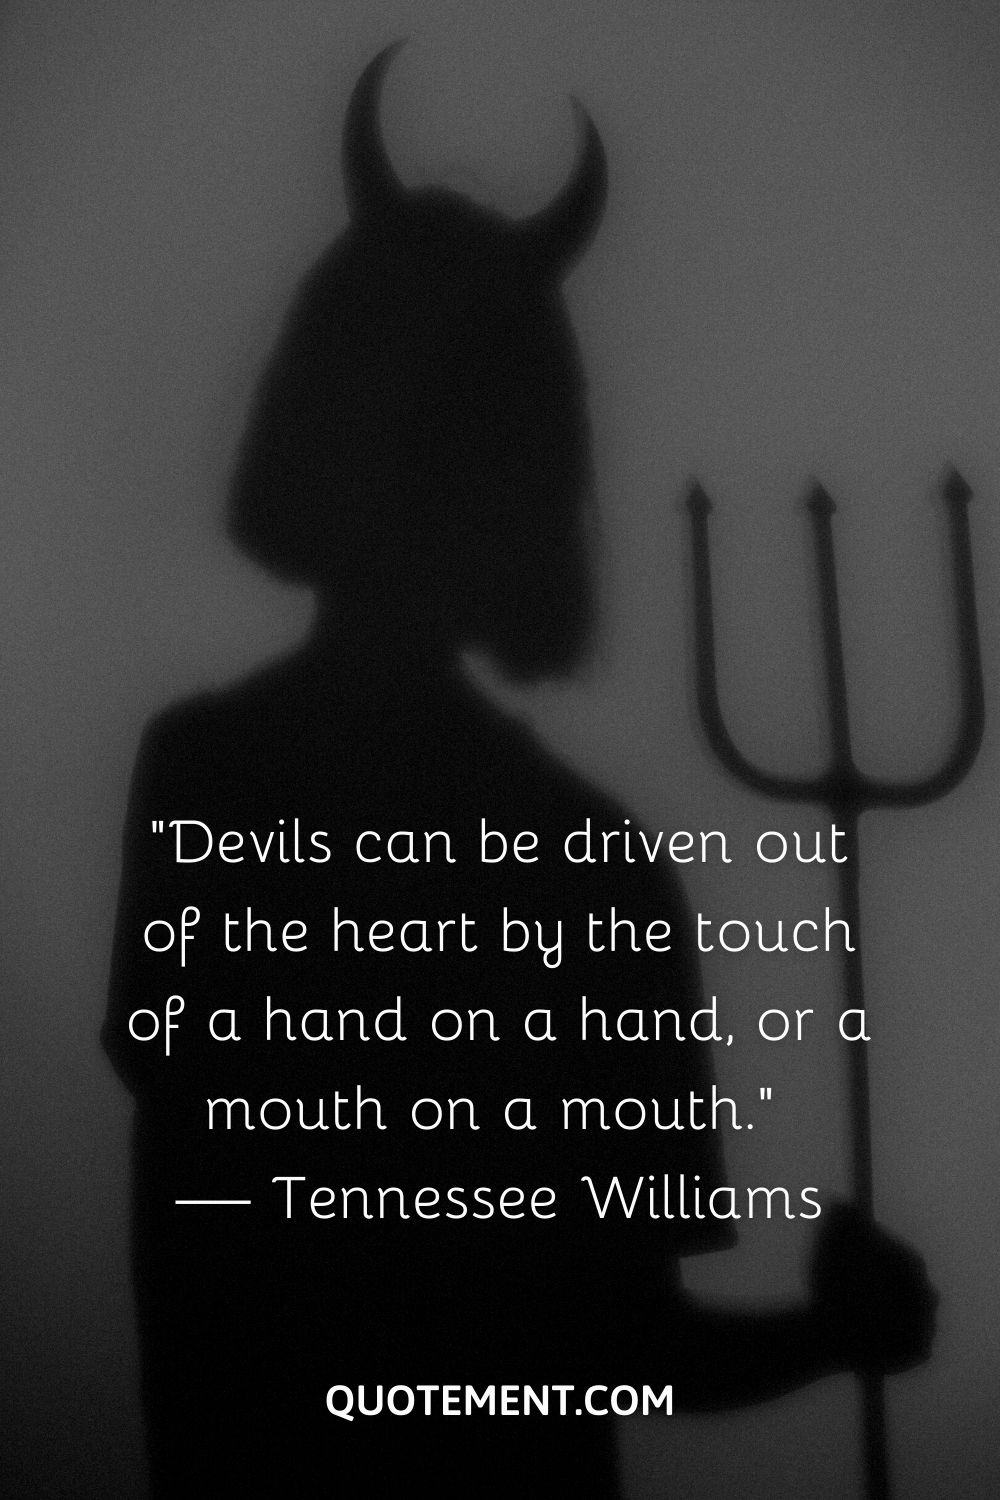 “Devils can be driven out of the heart by the touch of a hand on a hand, or a mouth on a mouth.” — Tennessee Williams